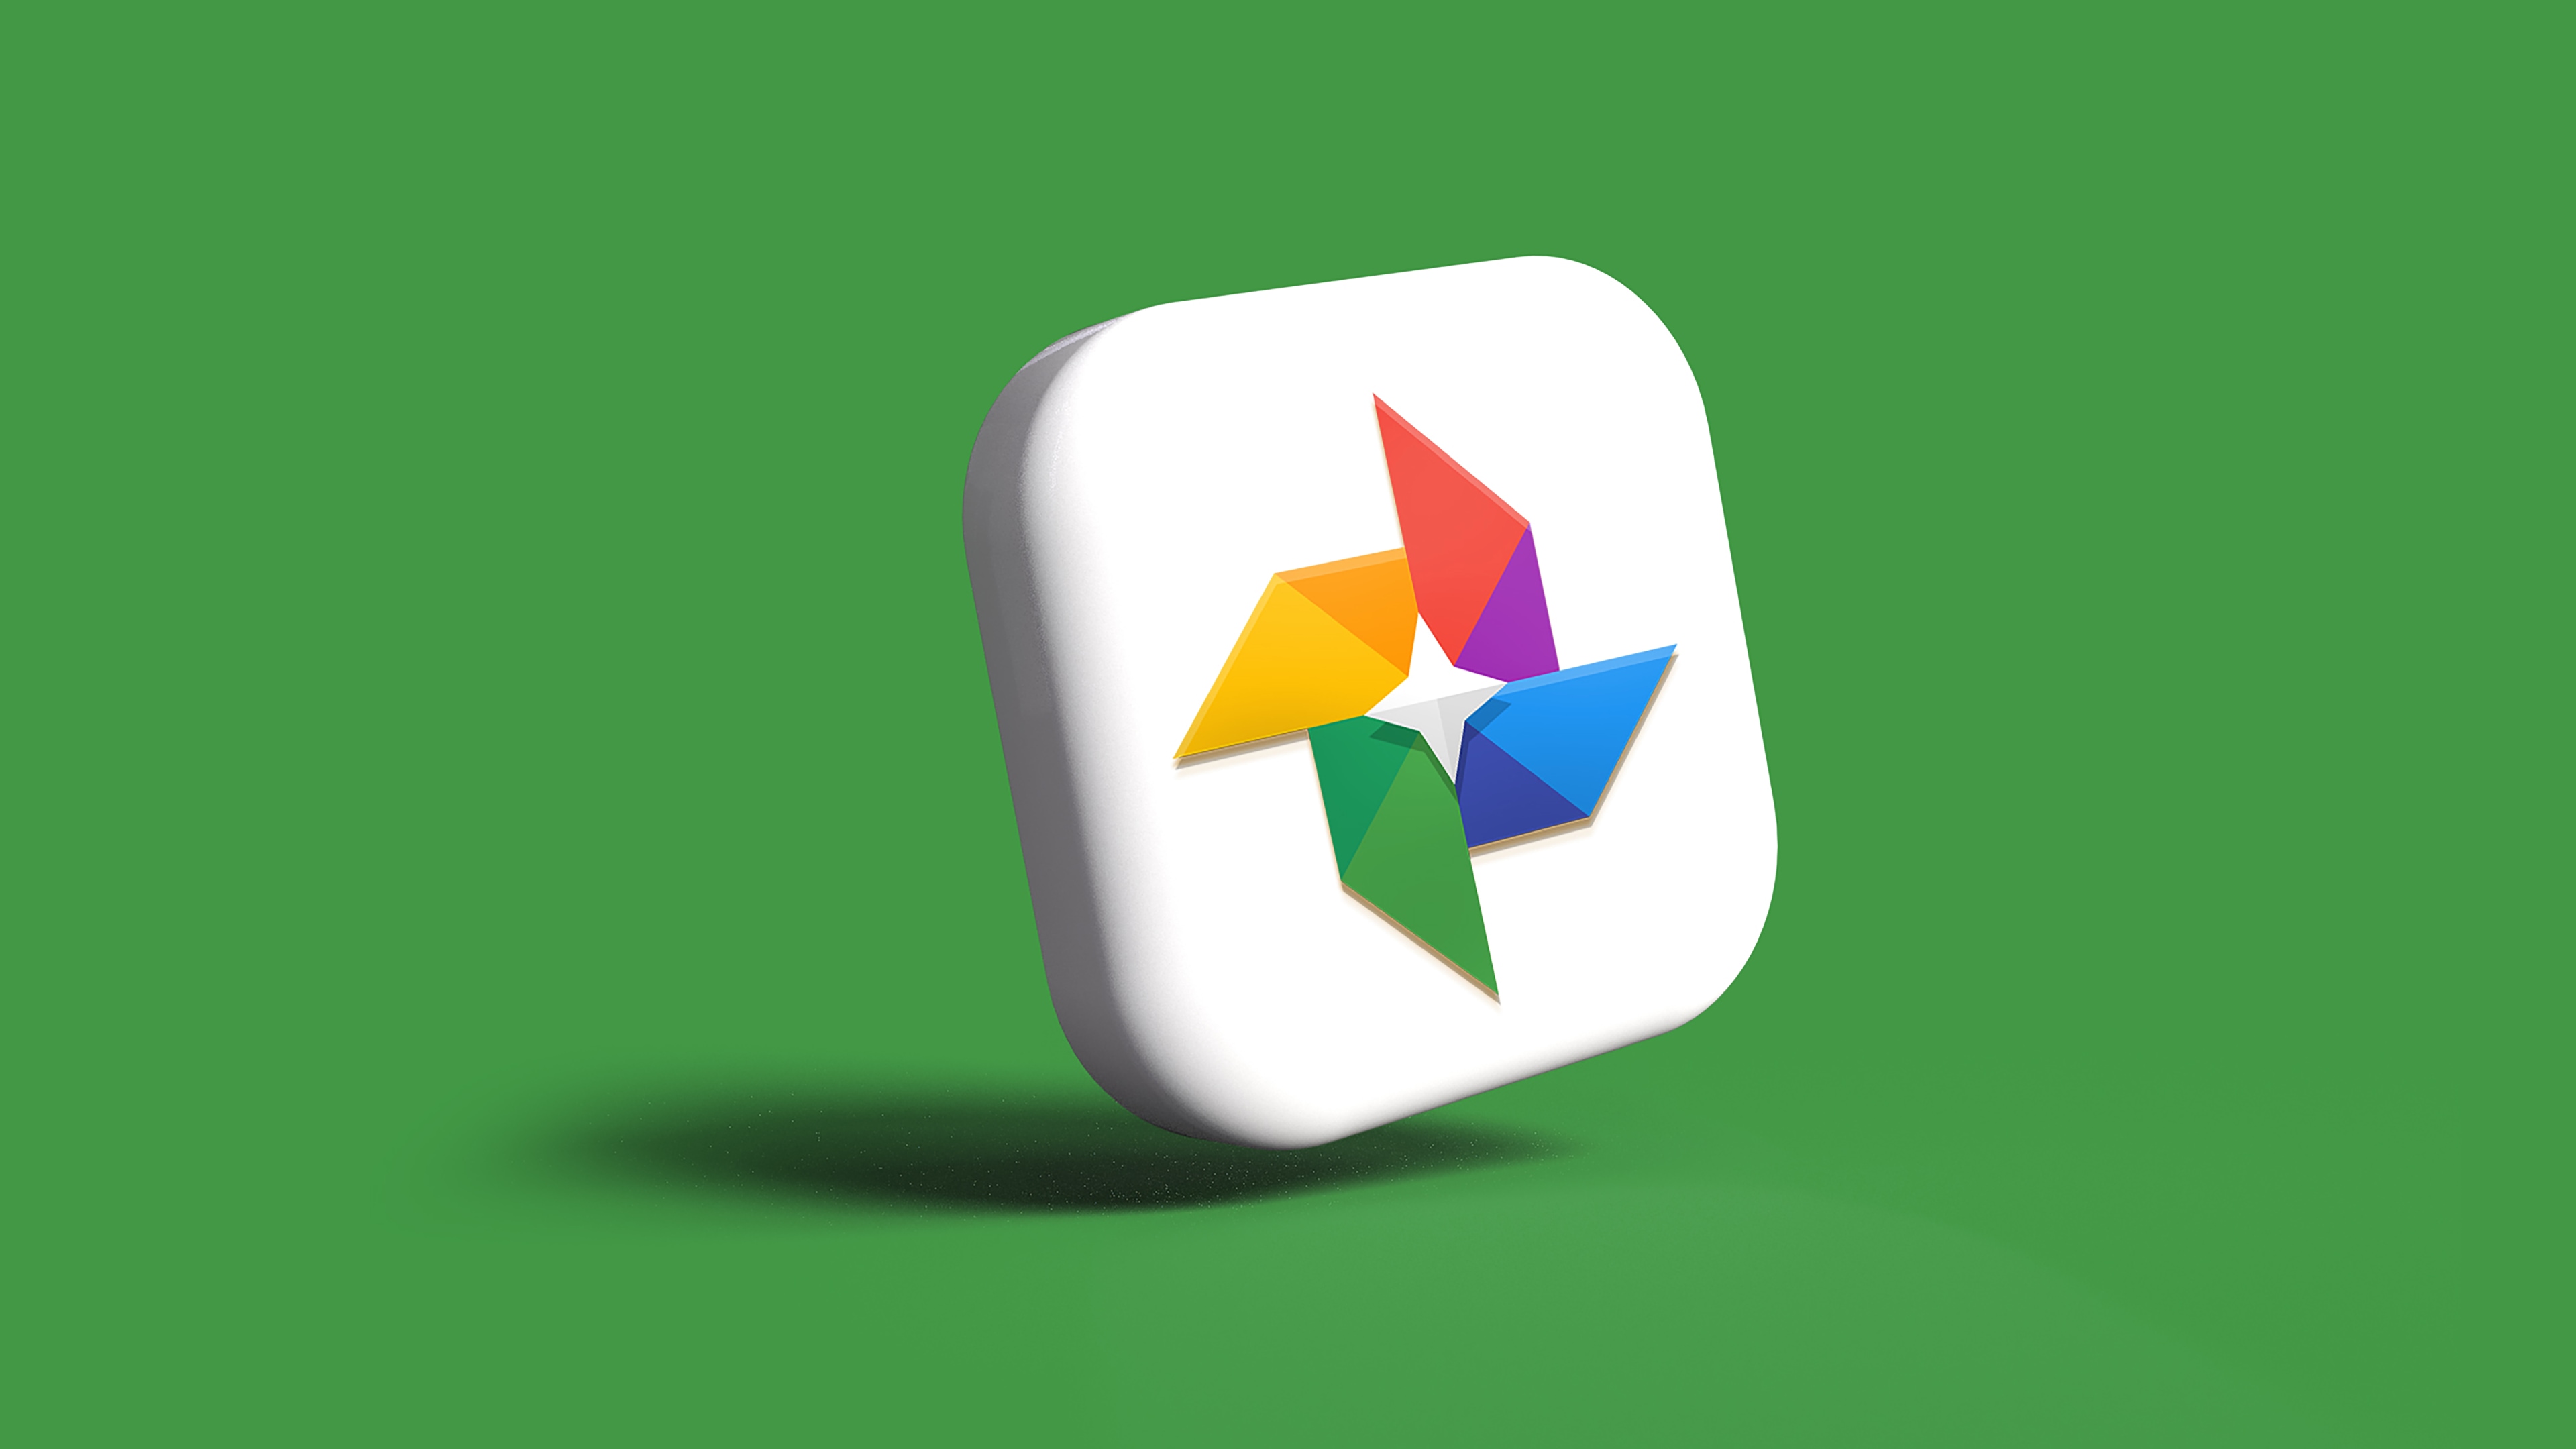 The Google Photos app icon in 3D, set against a green background